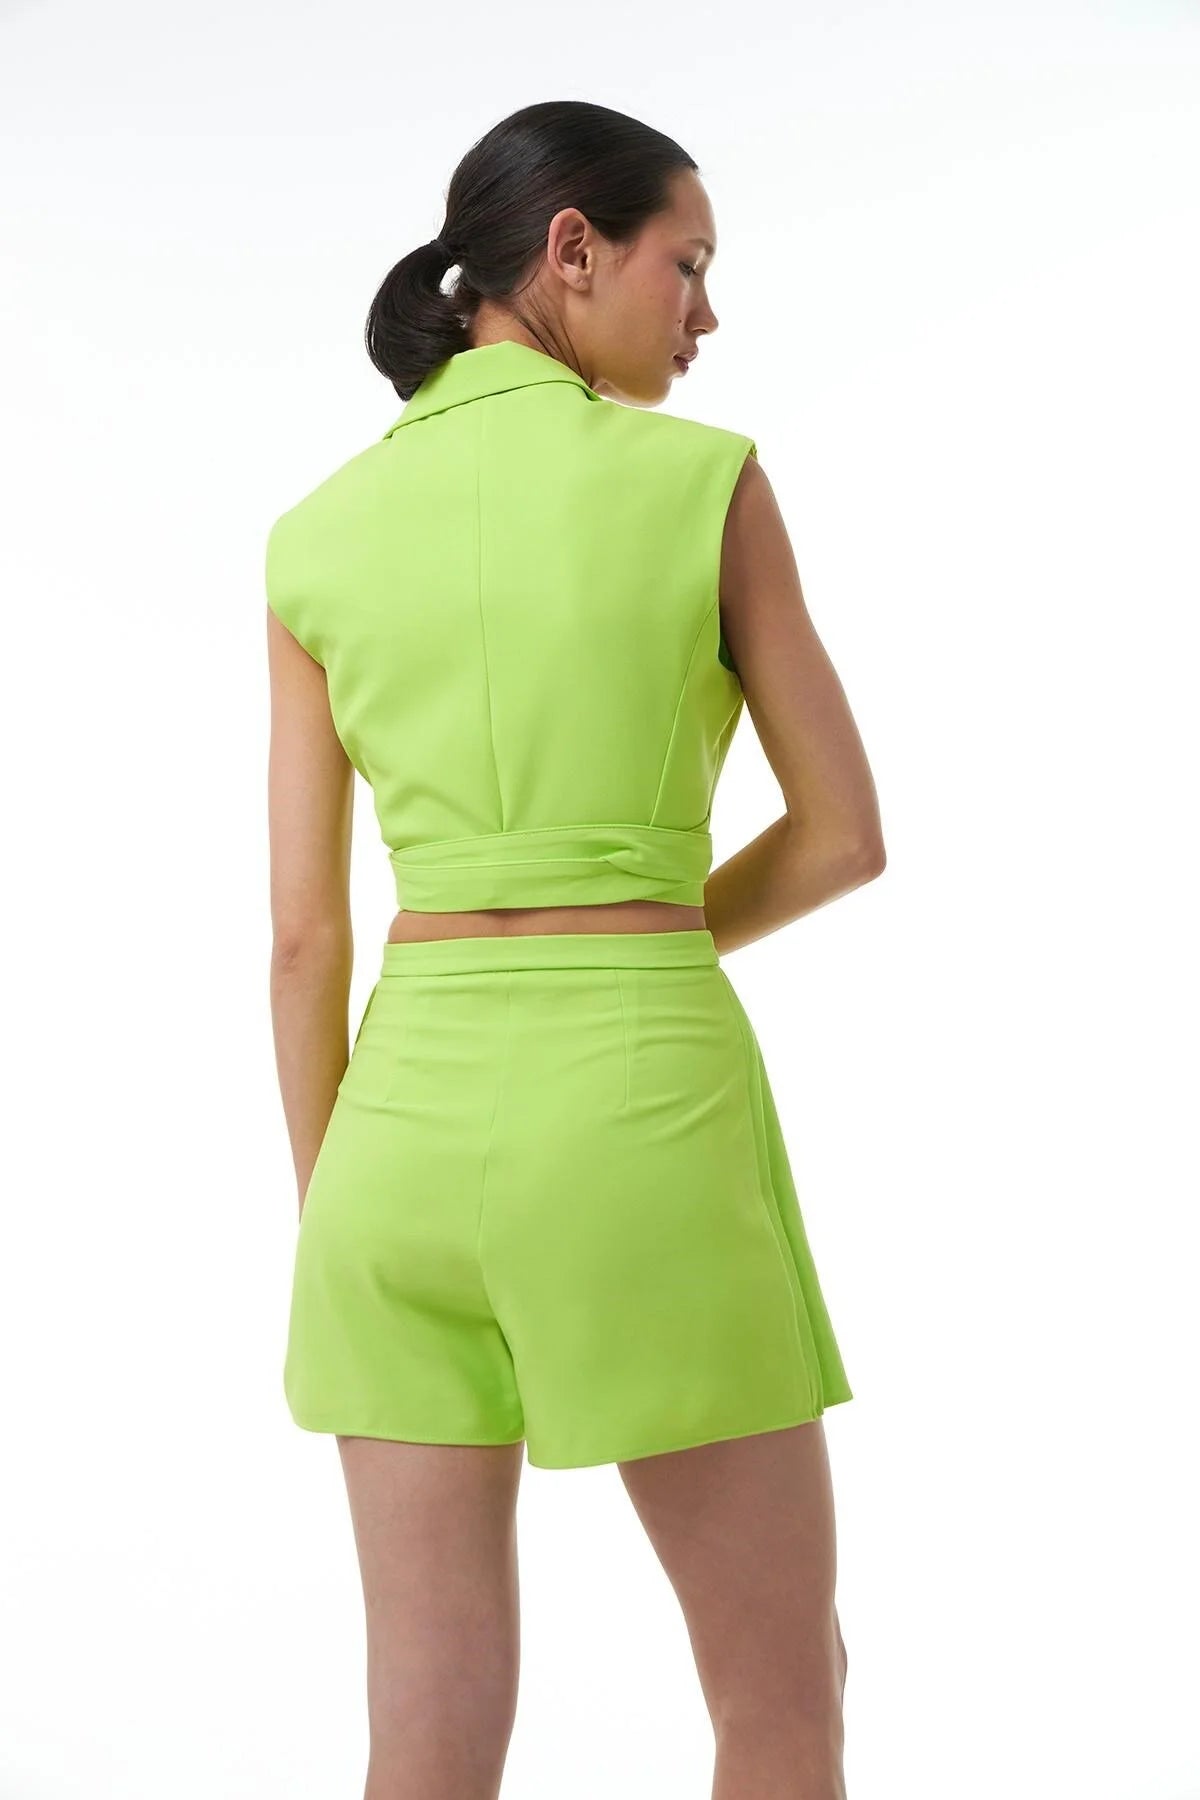 Energetic shorts skirt model with moving design created by pleats.